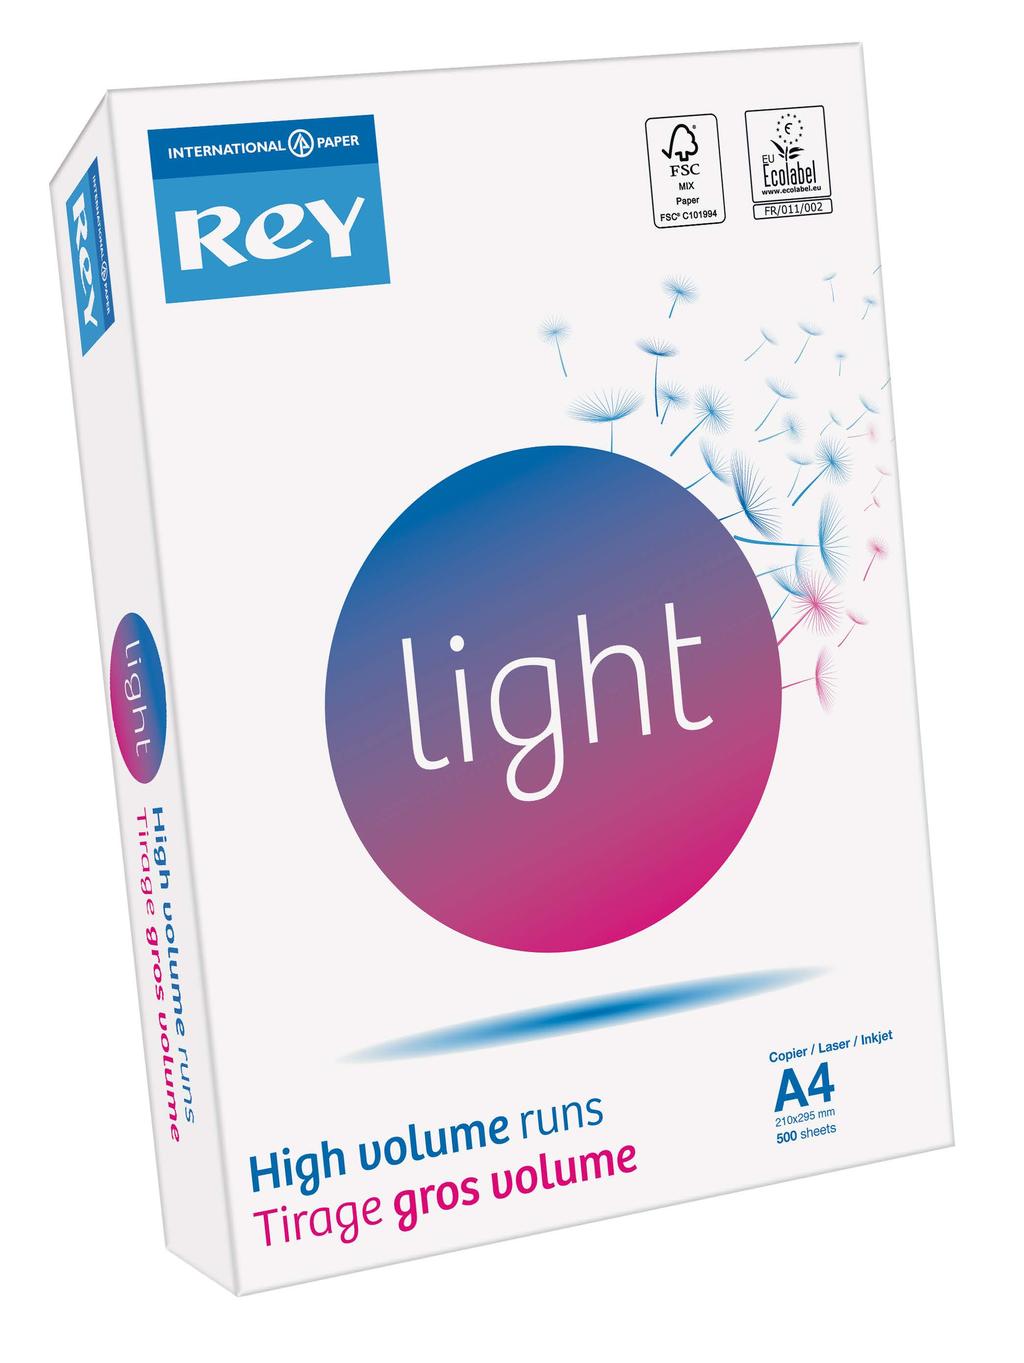 Products Light Rey Light High volume runs Best for: Black and white everyday copying, in-house